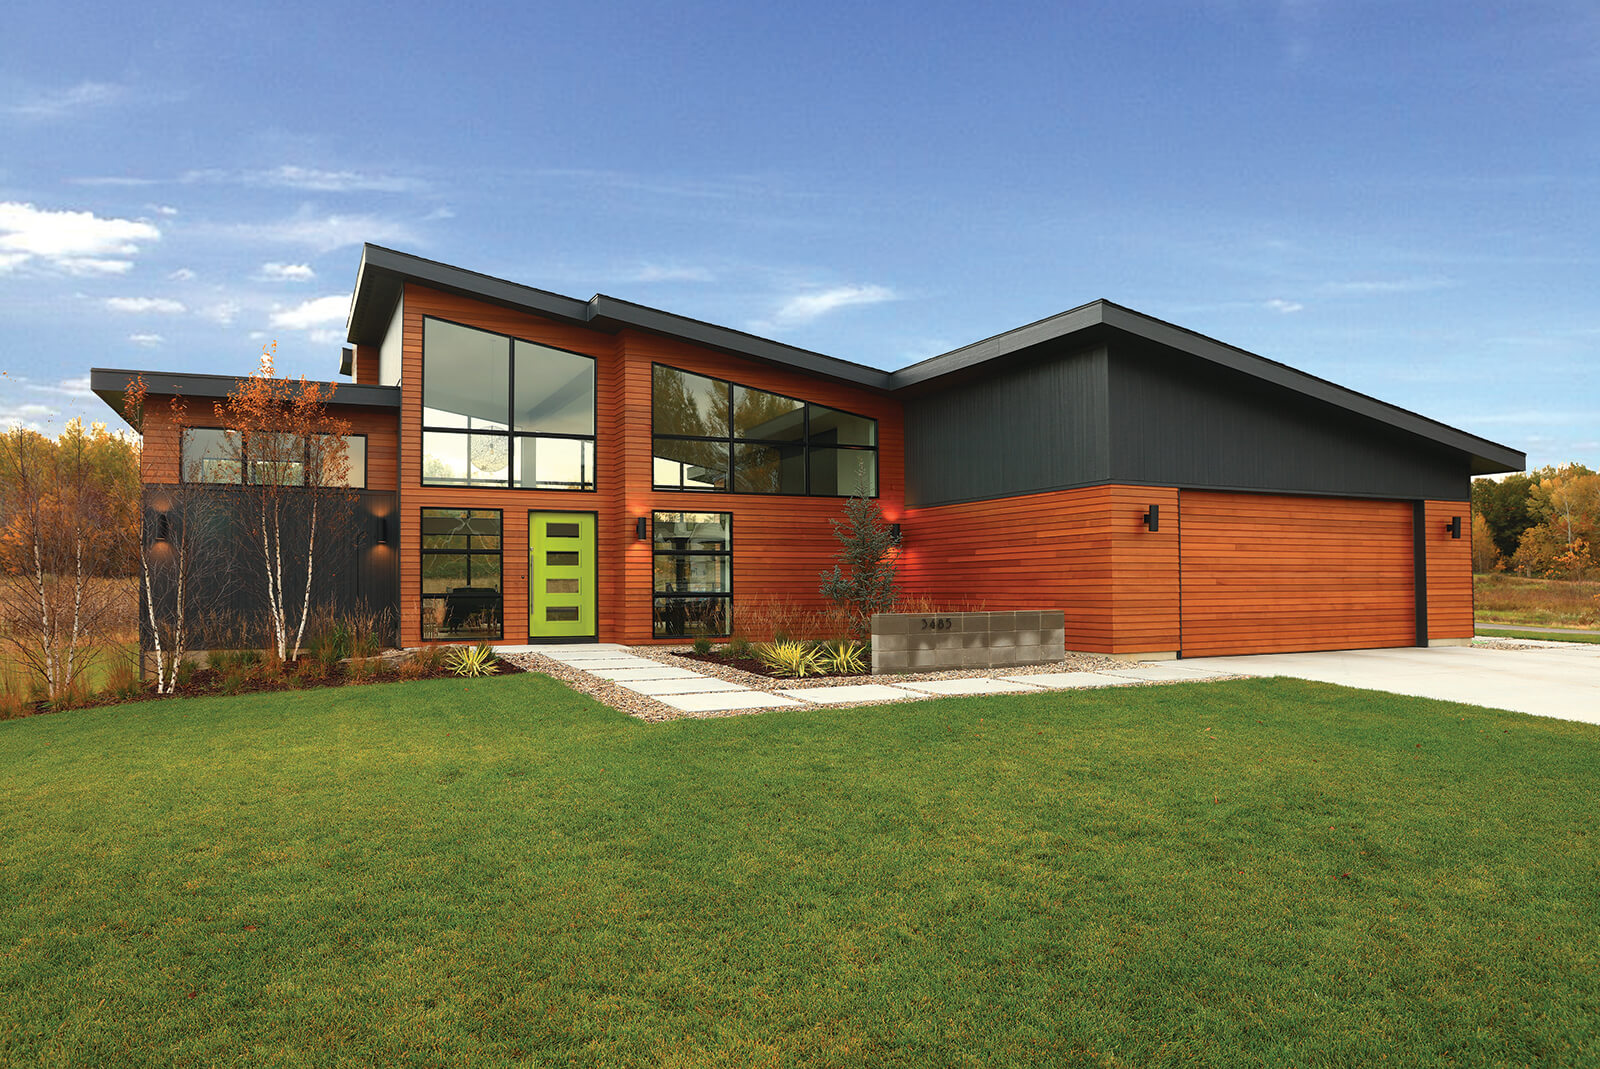 Modern Home Design is Making It's Mark All Across the Country